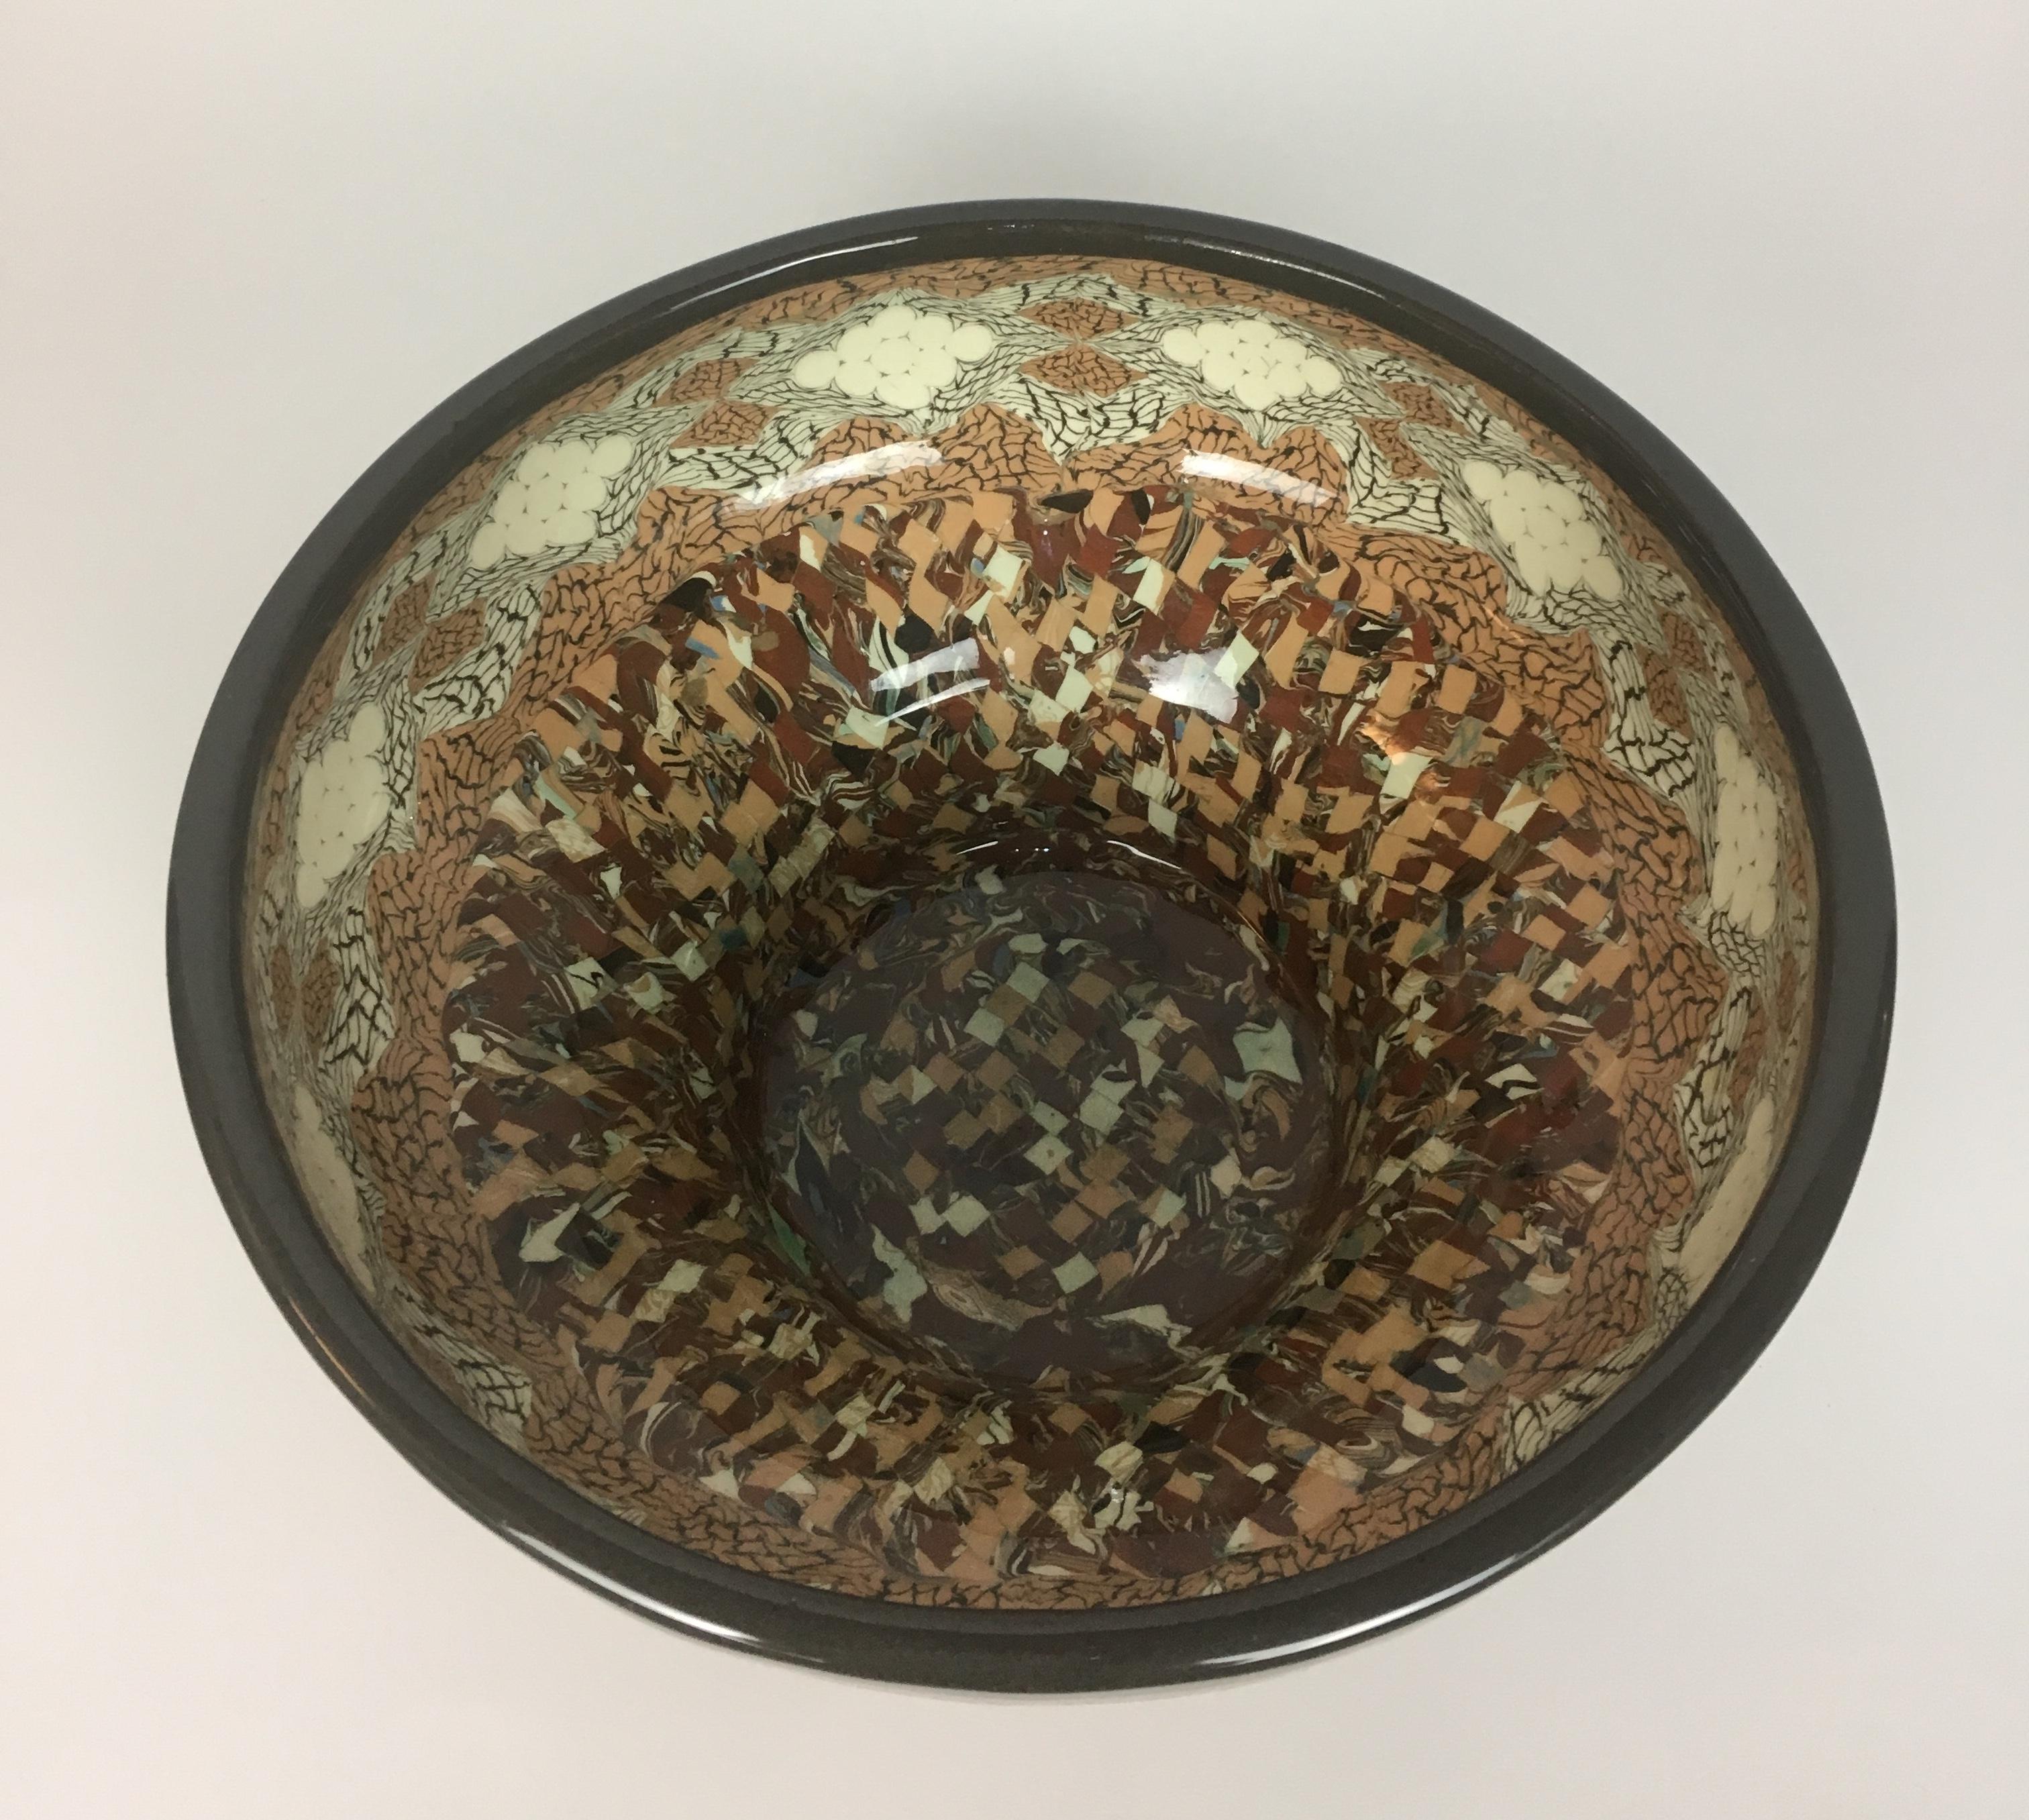 20th Century French Vallauris Clay Mosaic Bowl by Master Ceramicist Jean Gerbino